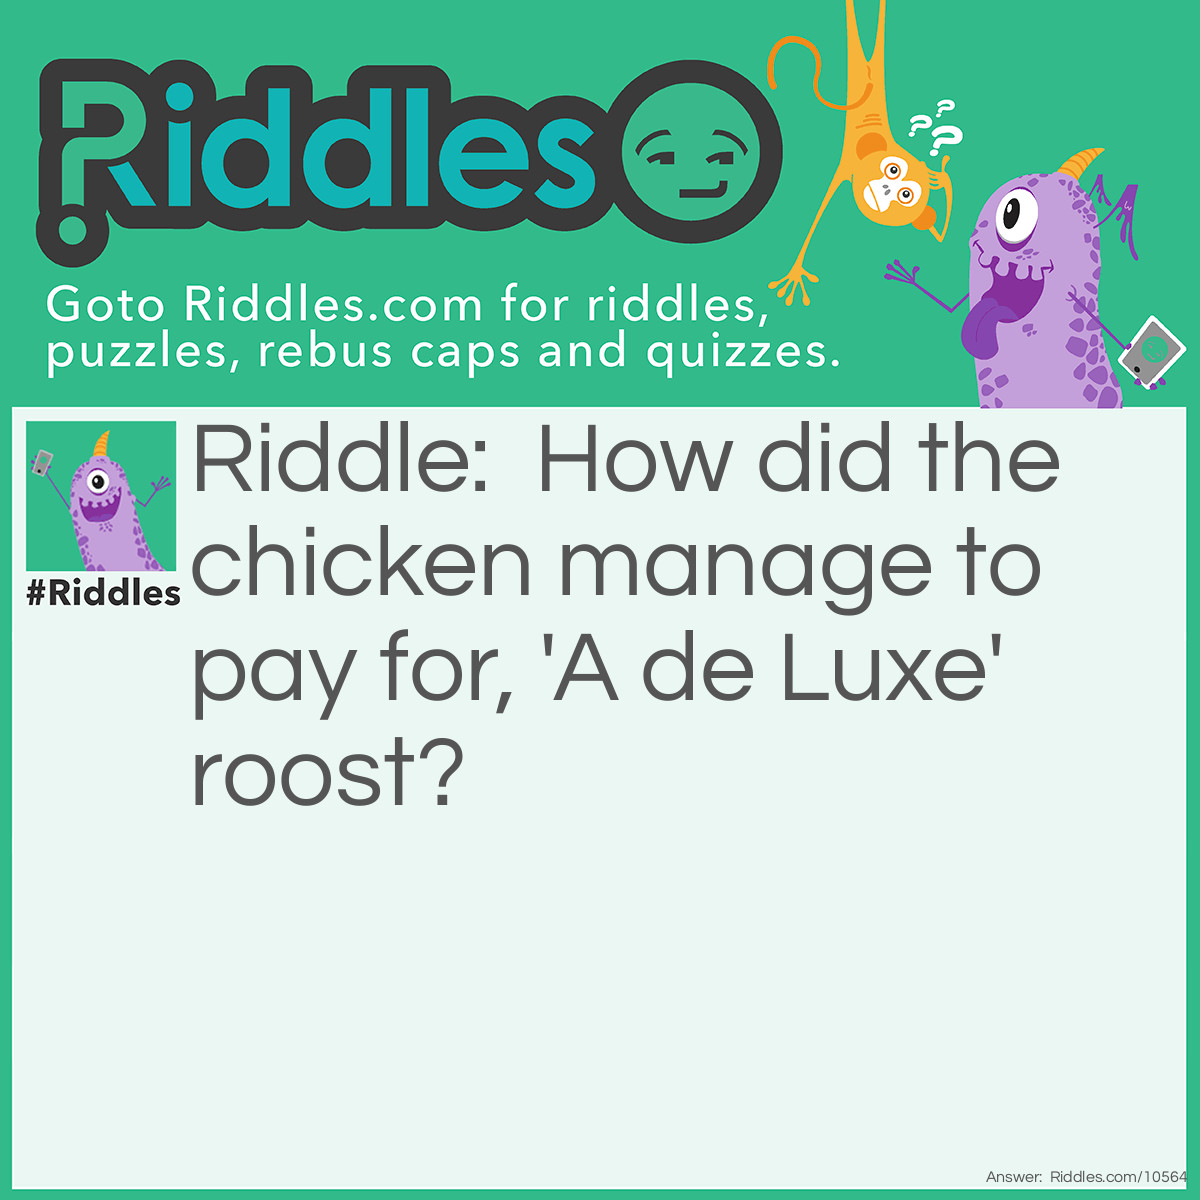 Riddle: How did the chicken manage to pay for, 'A de Luxe' roost? Answer: By Higher Perchase.